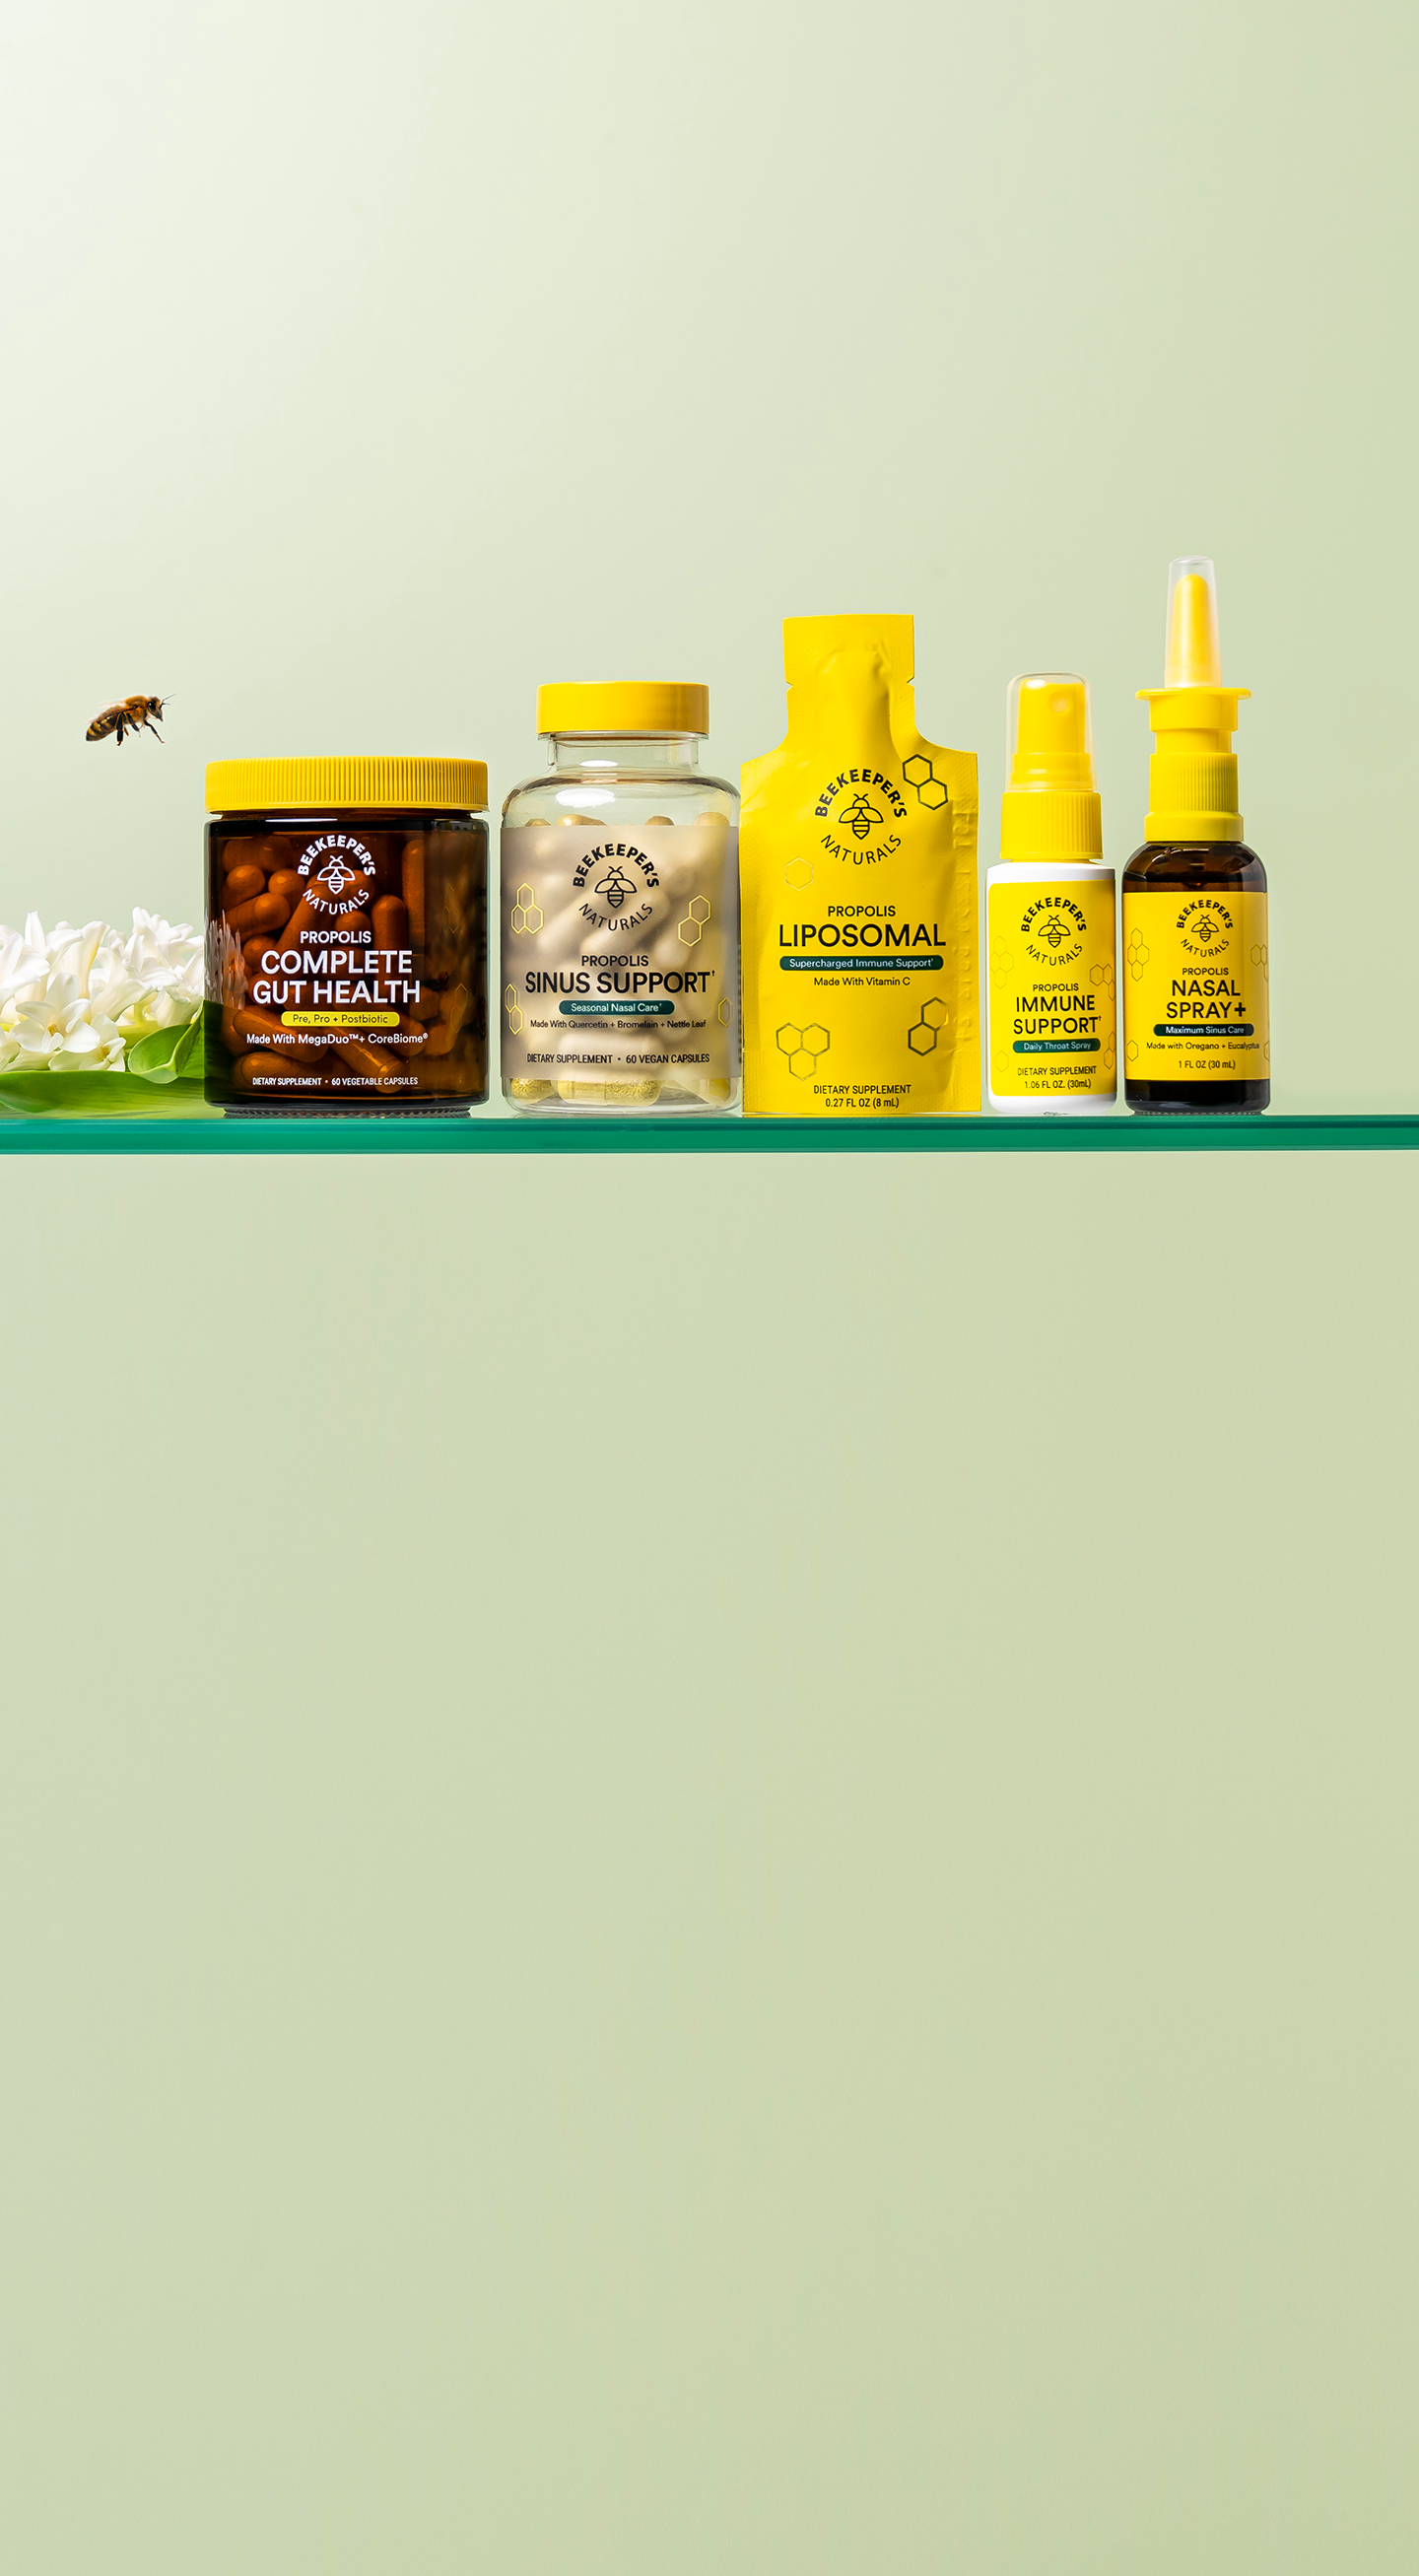 Here are My Thoughts on the Beekeeper's Naturals Product Line